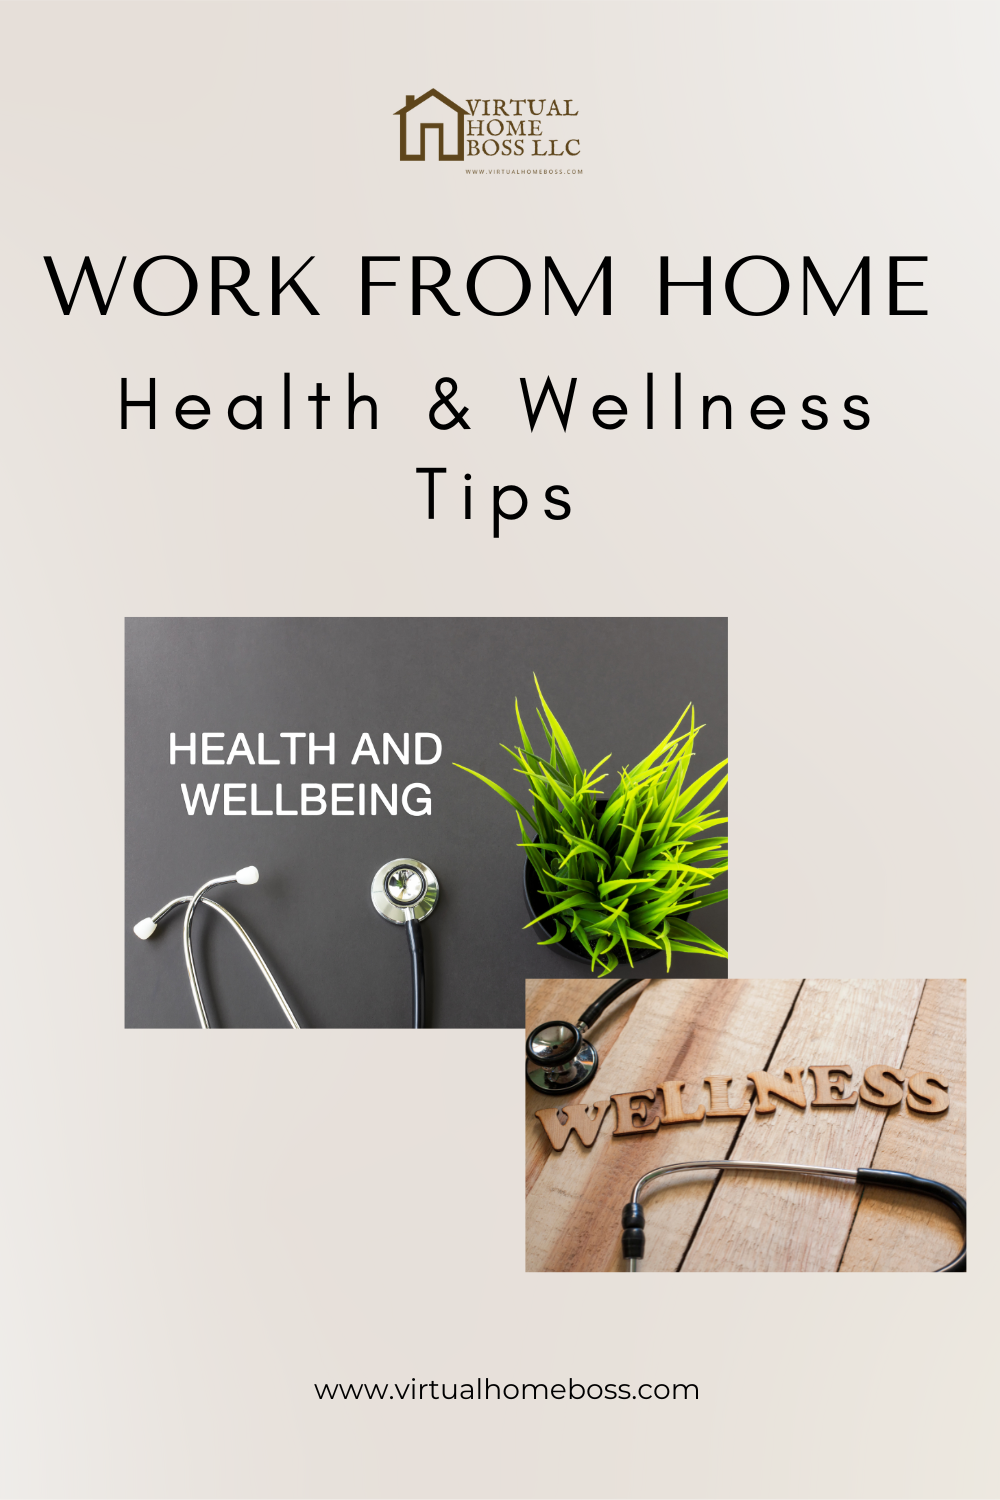 Work From Home Health & Wellness Tips